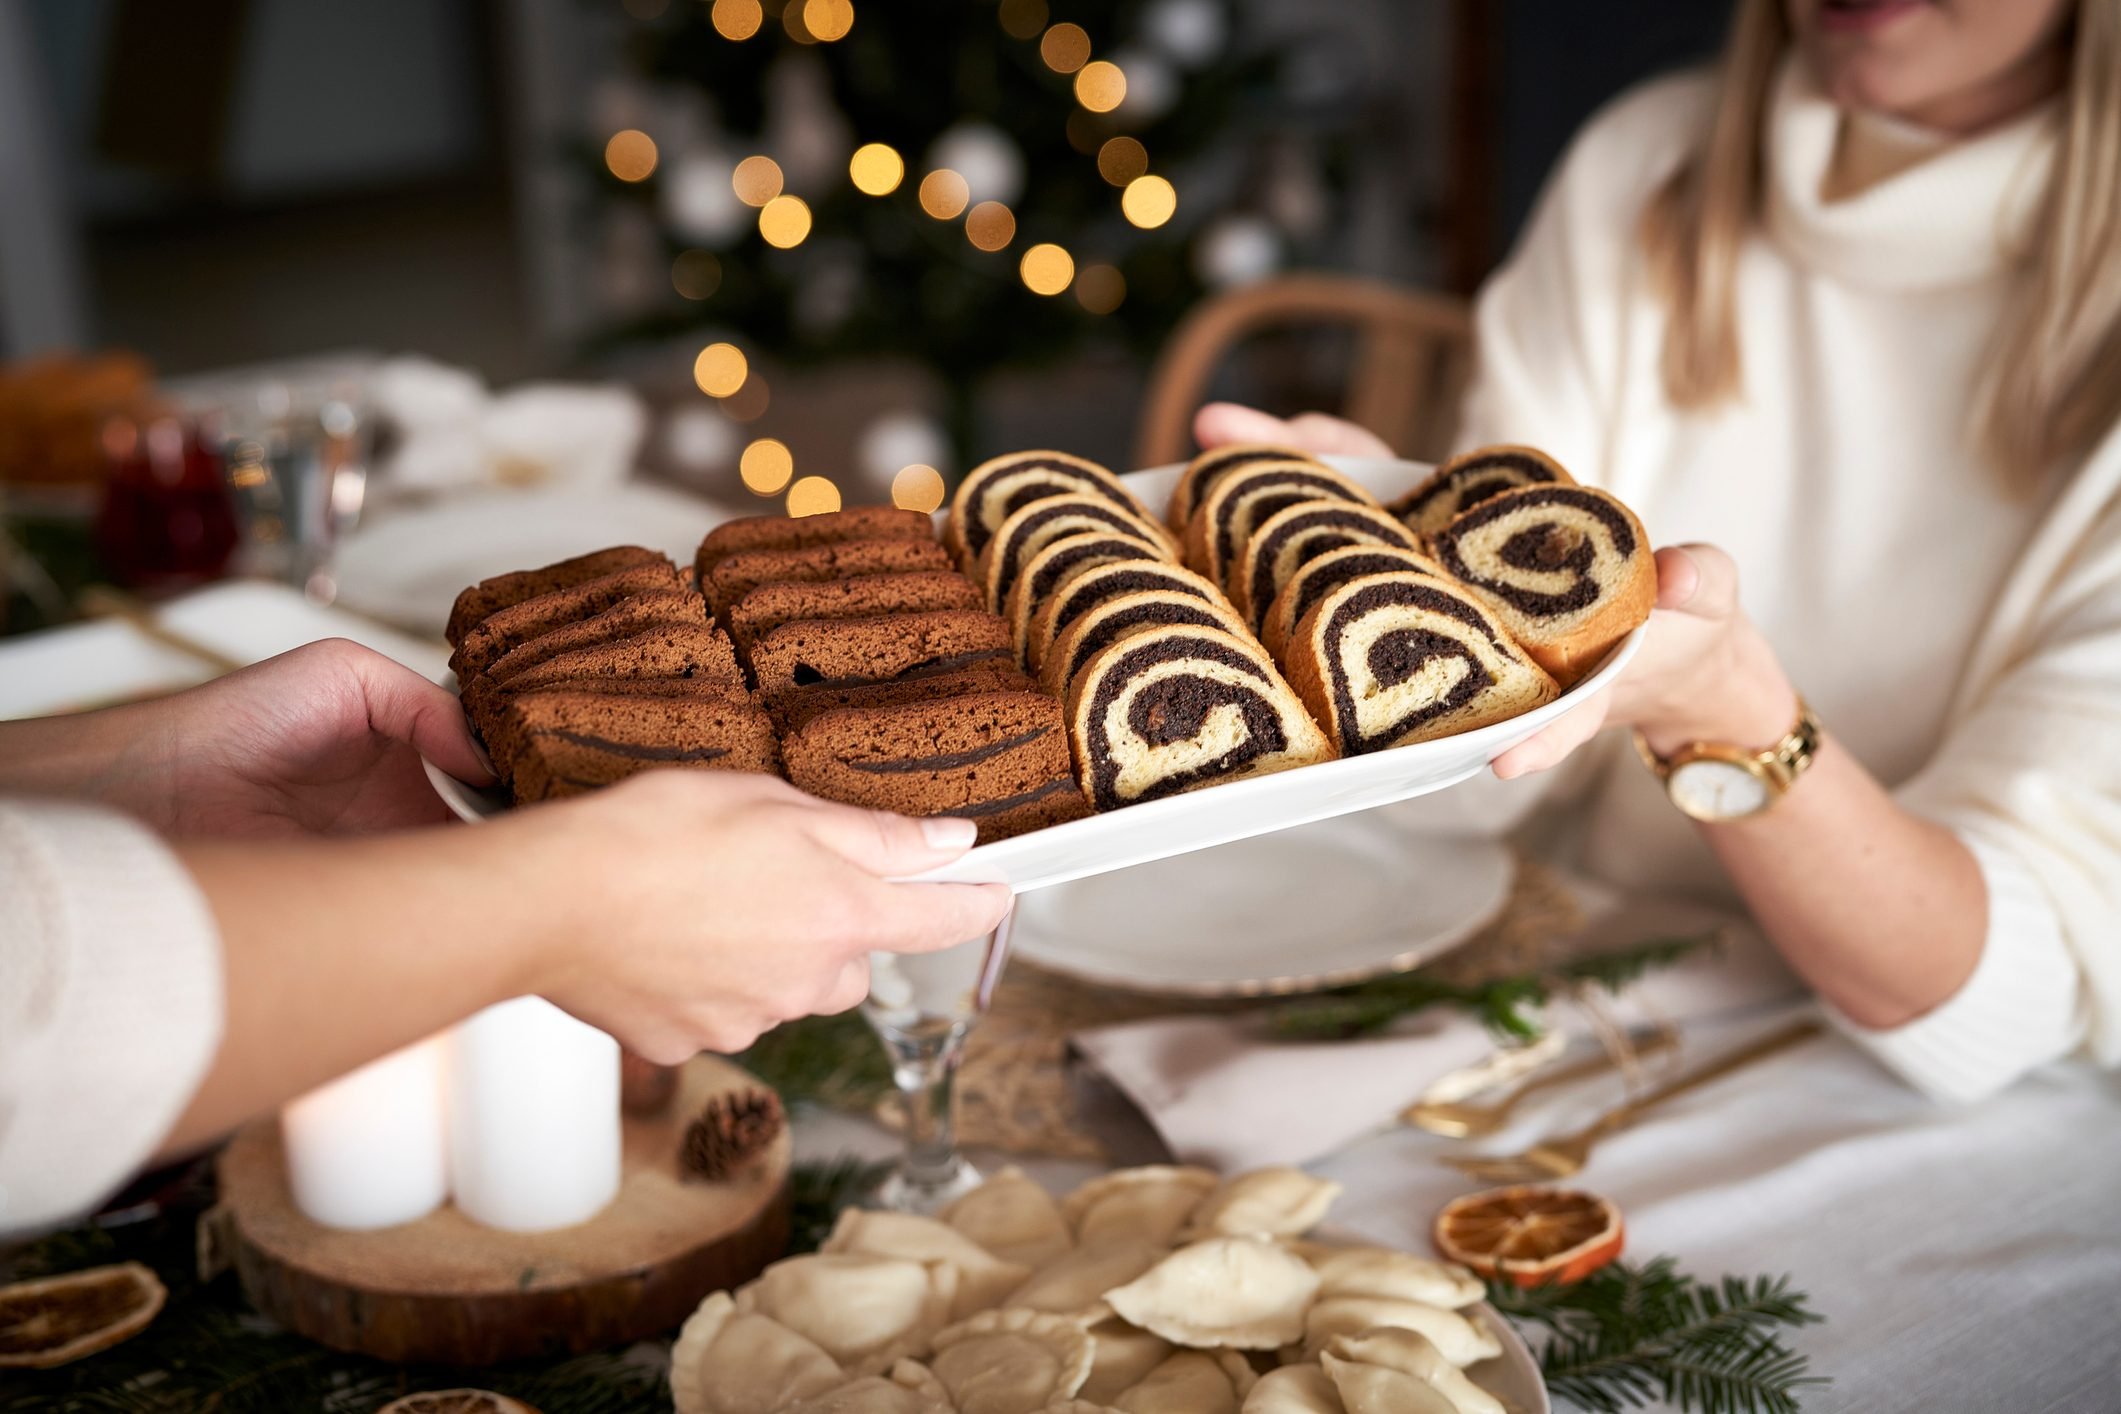 What to Say to People Who Push Food on You During the Holidays